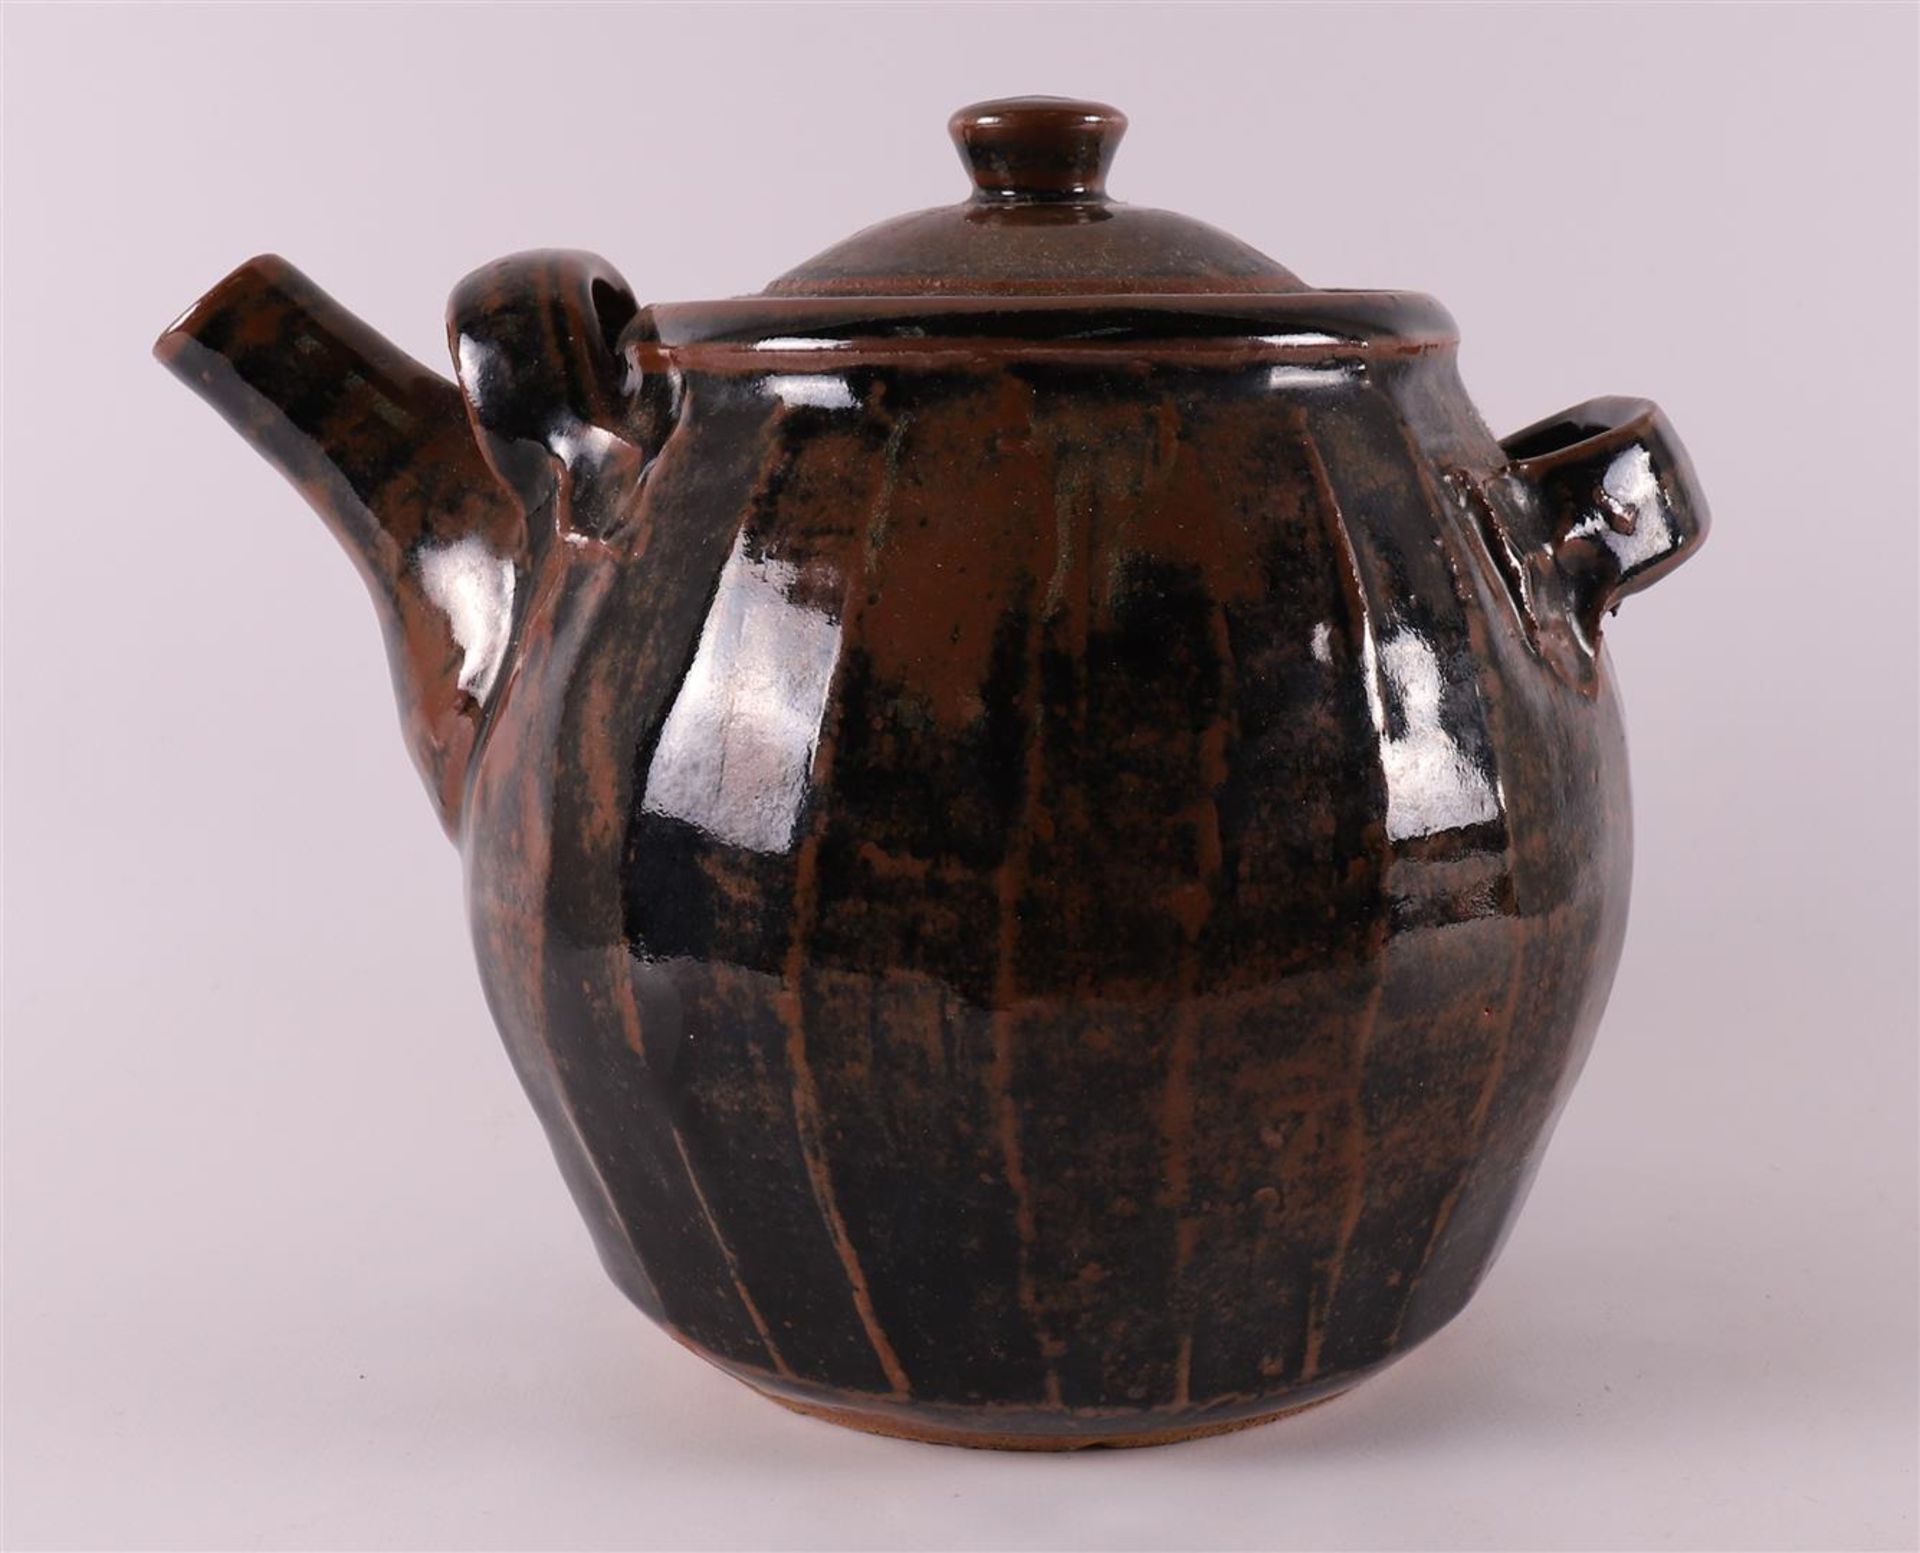 A brown glazed ceramic teapot, 2nd half of the 20th century.